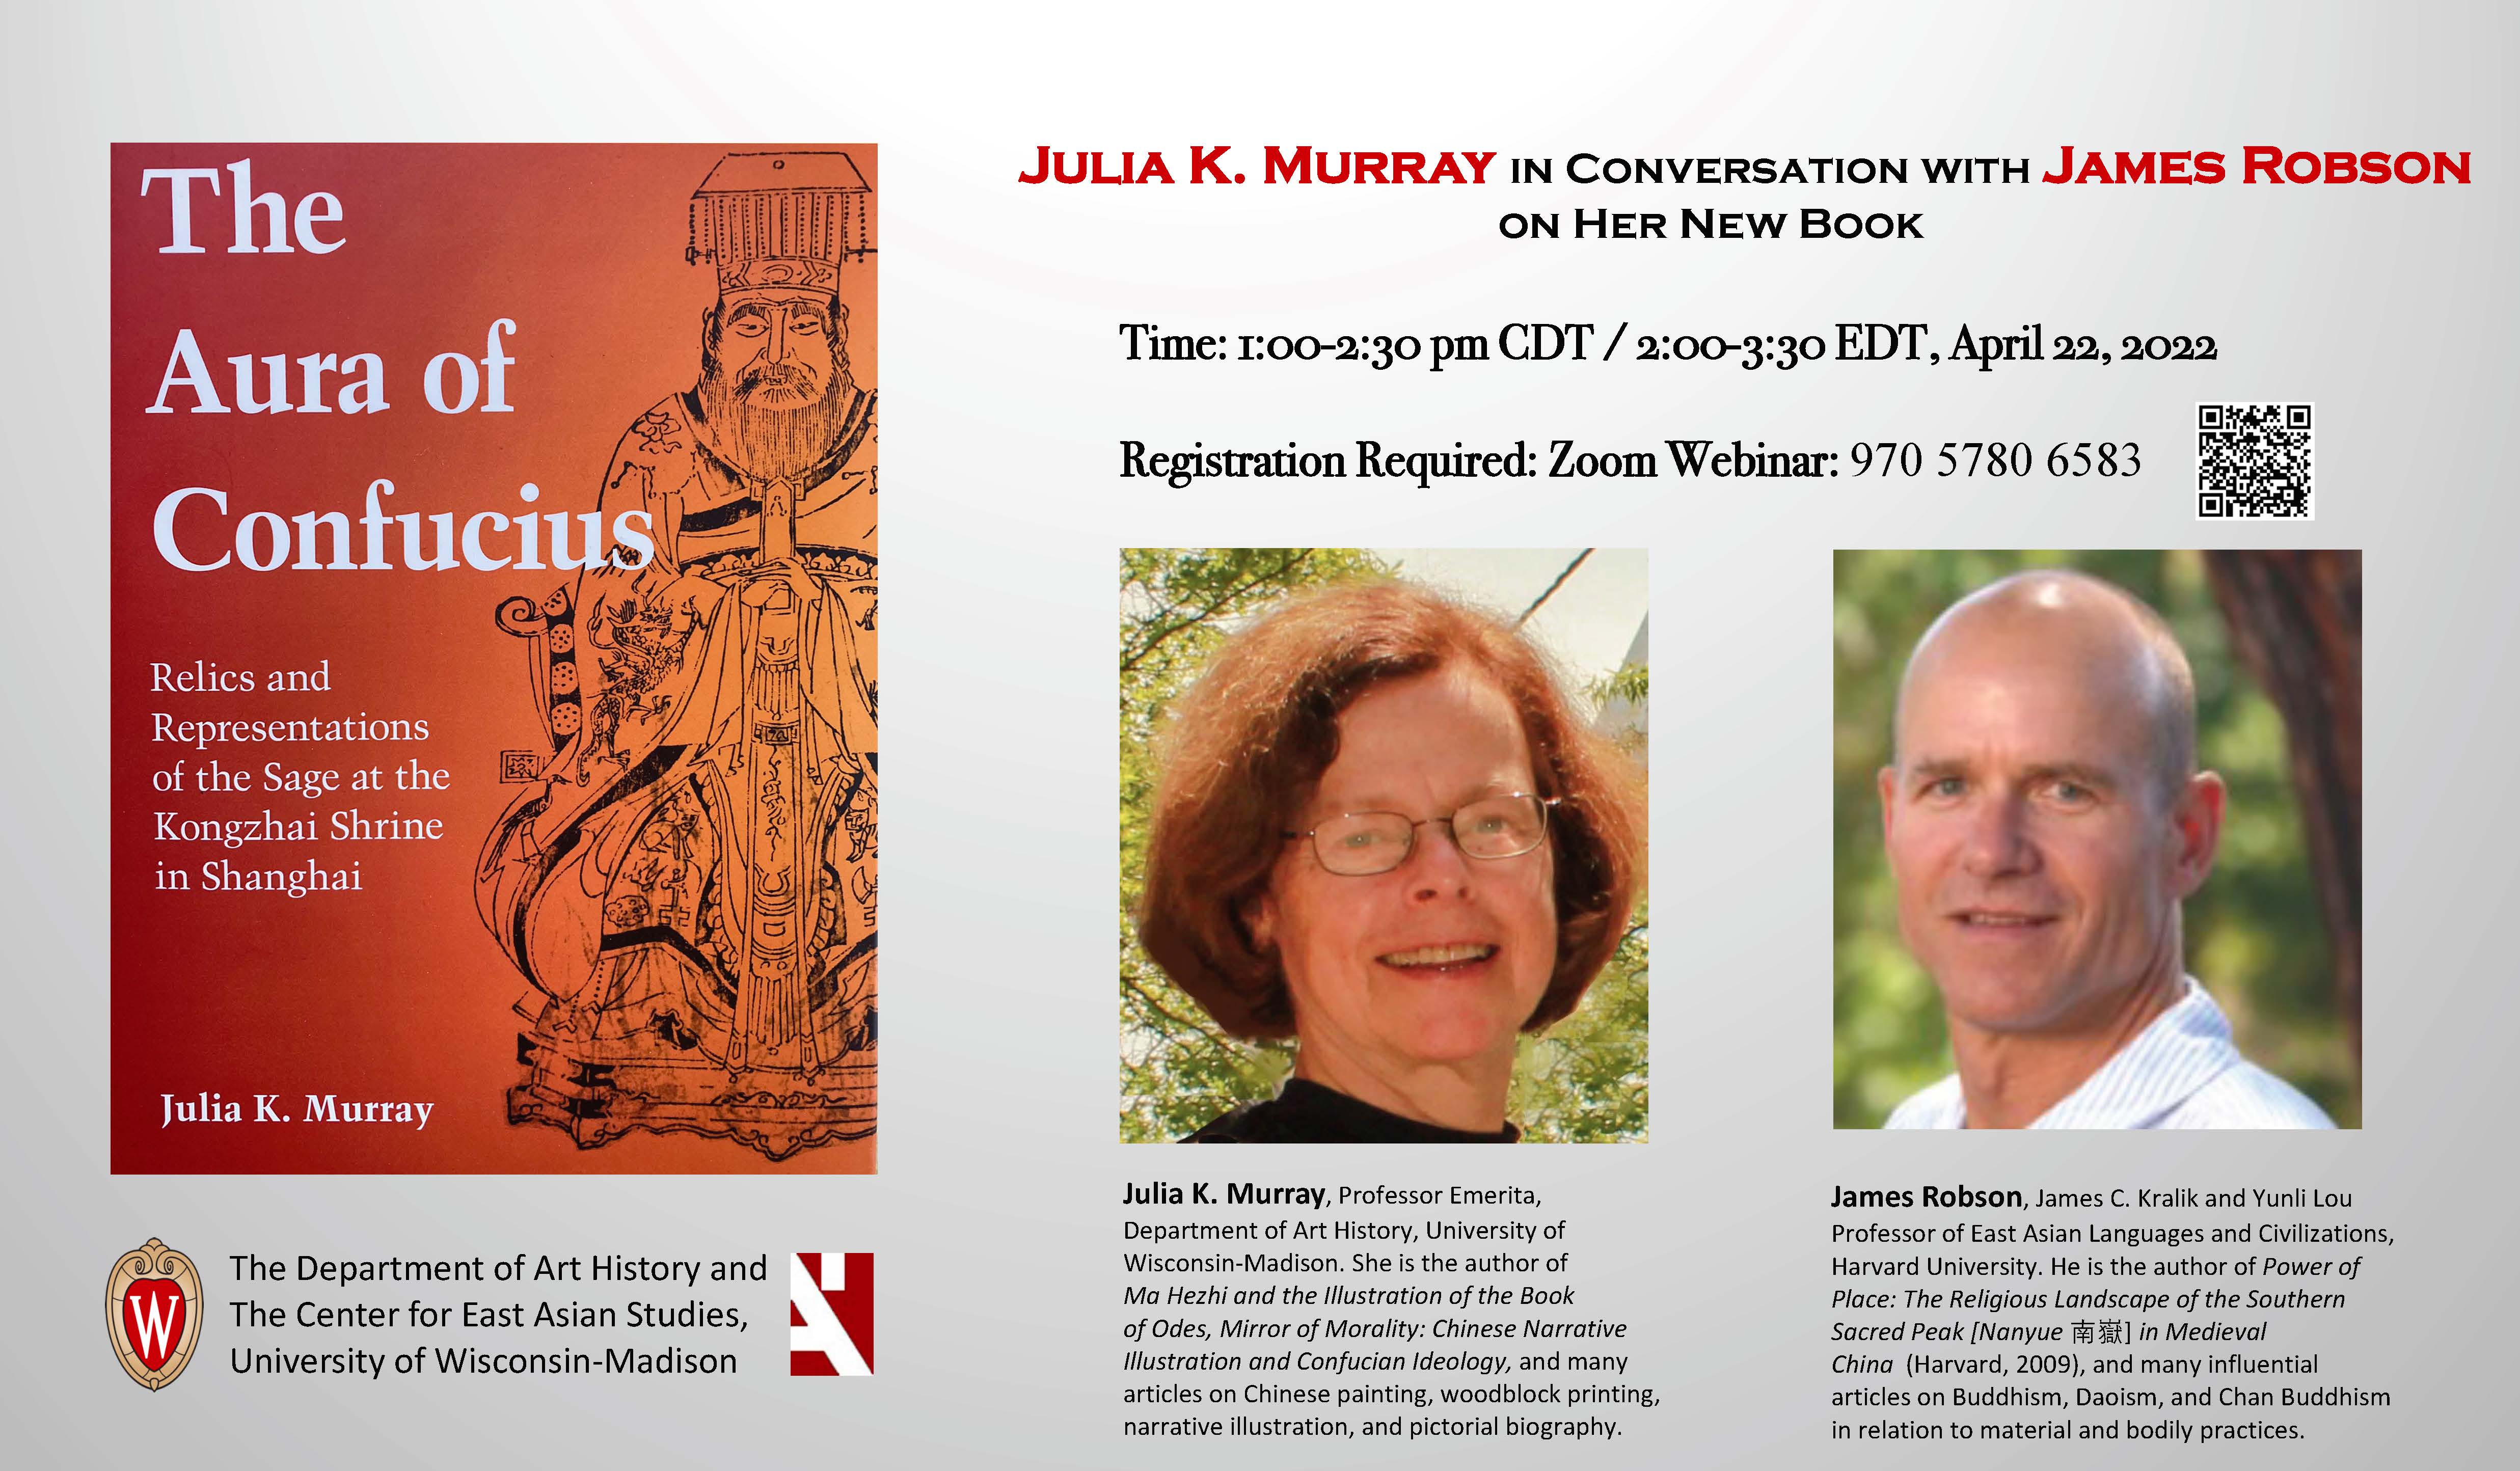 Book Launch for THE AURA OF CONFUCIUS:  Julia K. Murray in conversation with James Robson